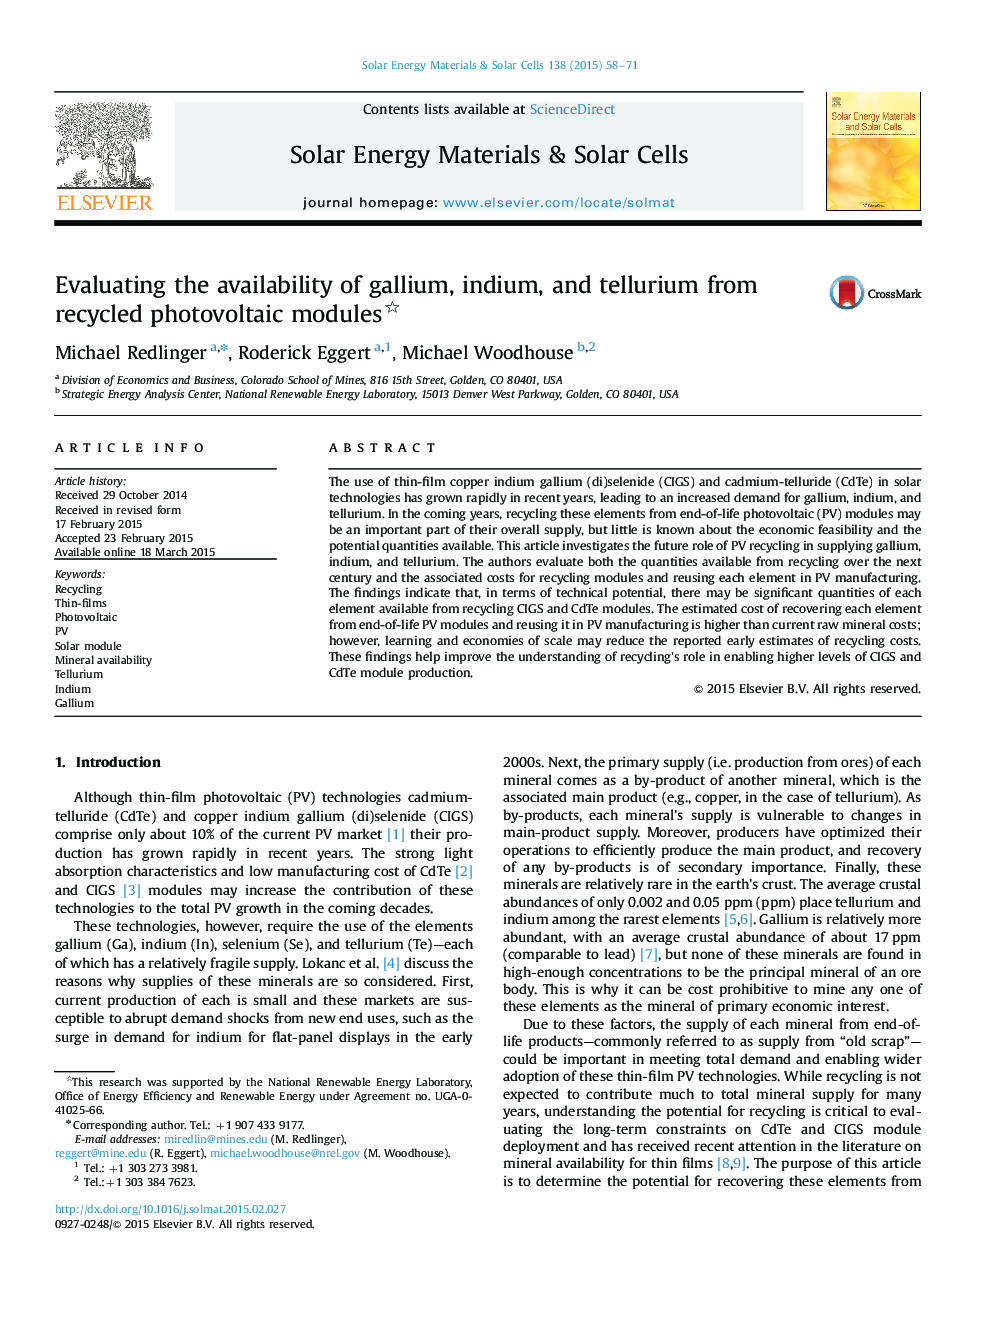 Evaluating the availability of gallium, indium, and tellurium from recycled photovoltaic modules 